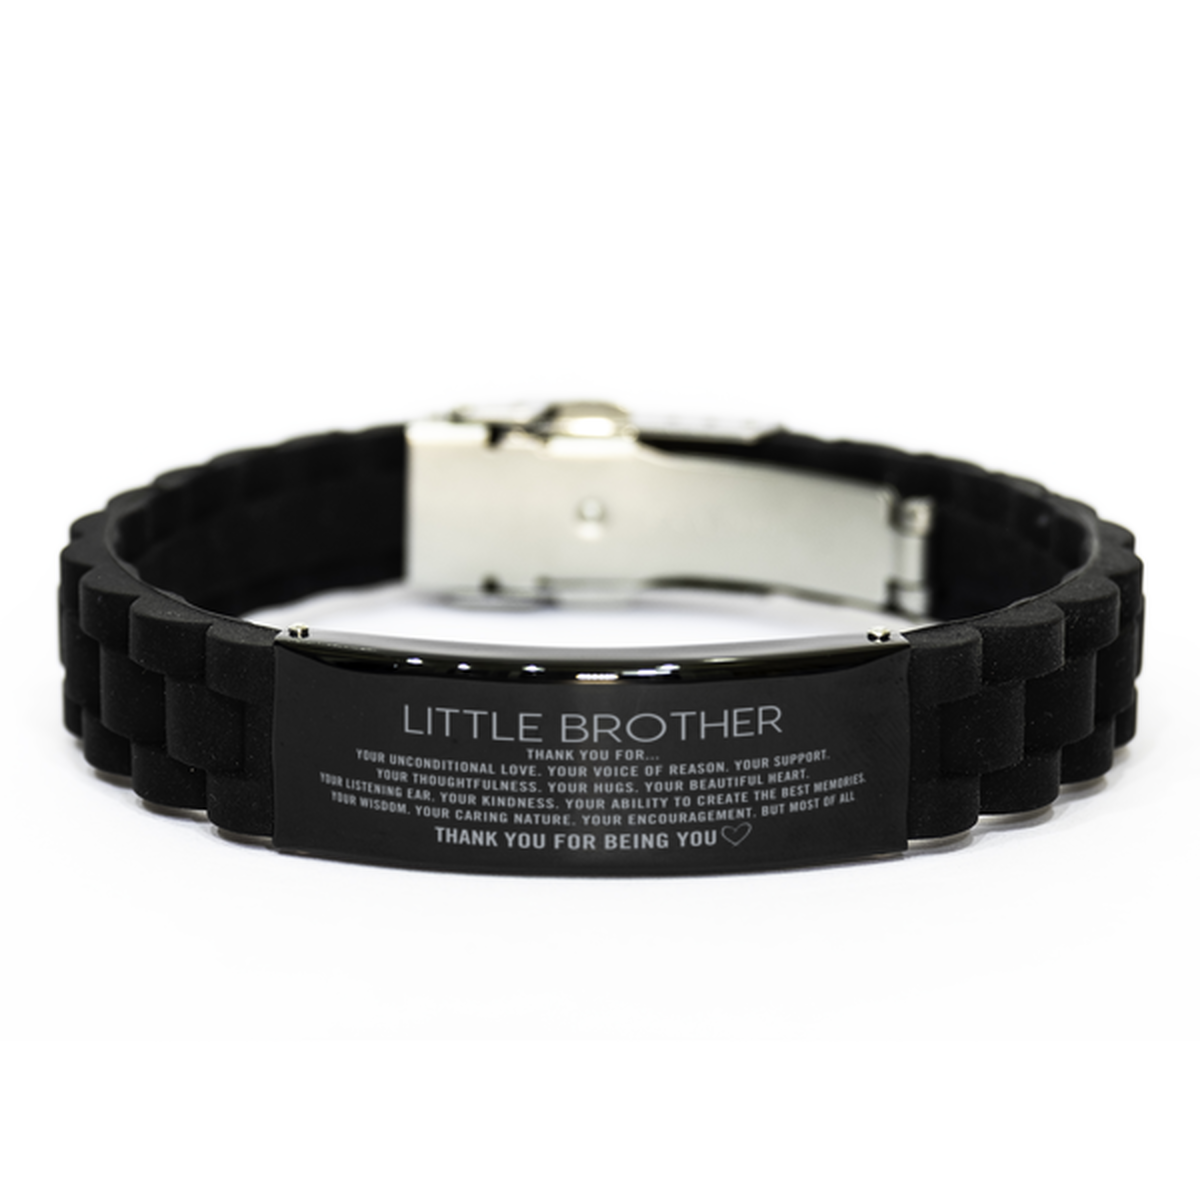 Little Brother Black Glidelock Clasp Bracelet Custom, Engraved Gifts For Little Brother Christmas Graduation Birthday Gifts for Men Women Little Brother Thank you for Your unconditional love